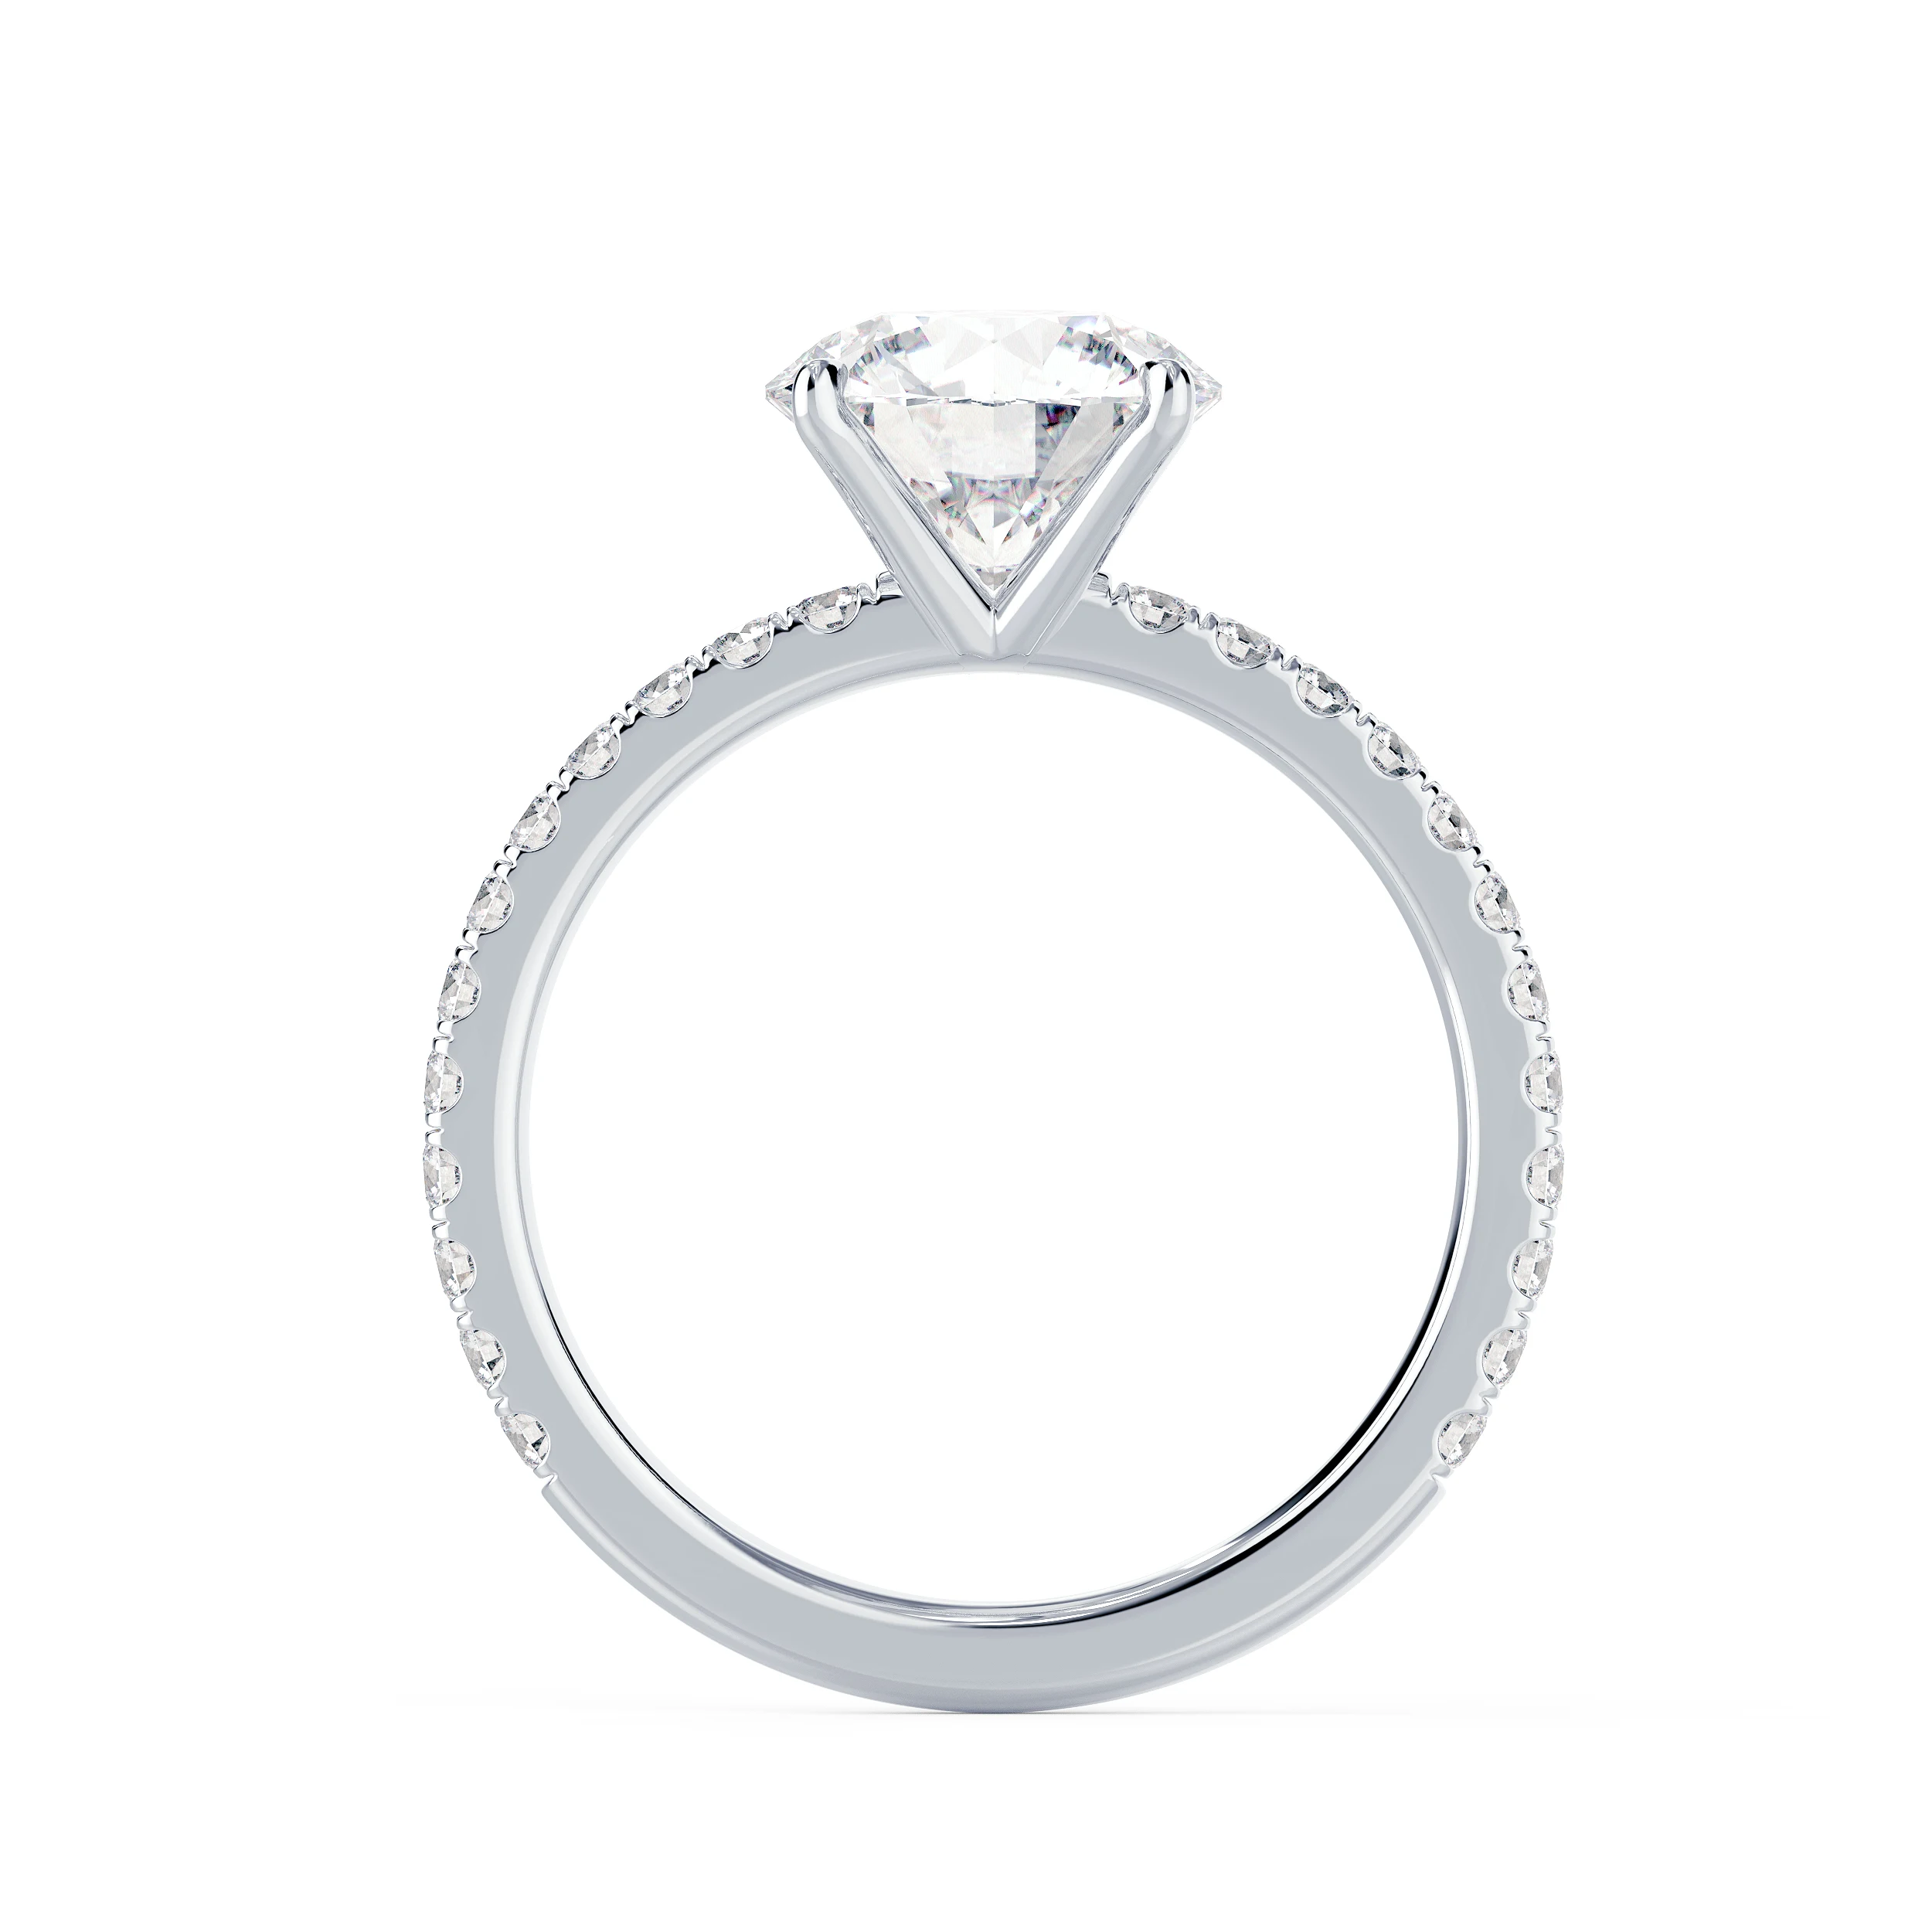 Exceptional Quality Man Made Diamonds Round Classic Four Prong Pavé Setting in White Gold (Profile View)